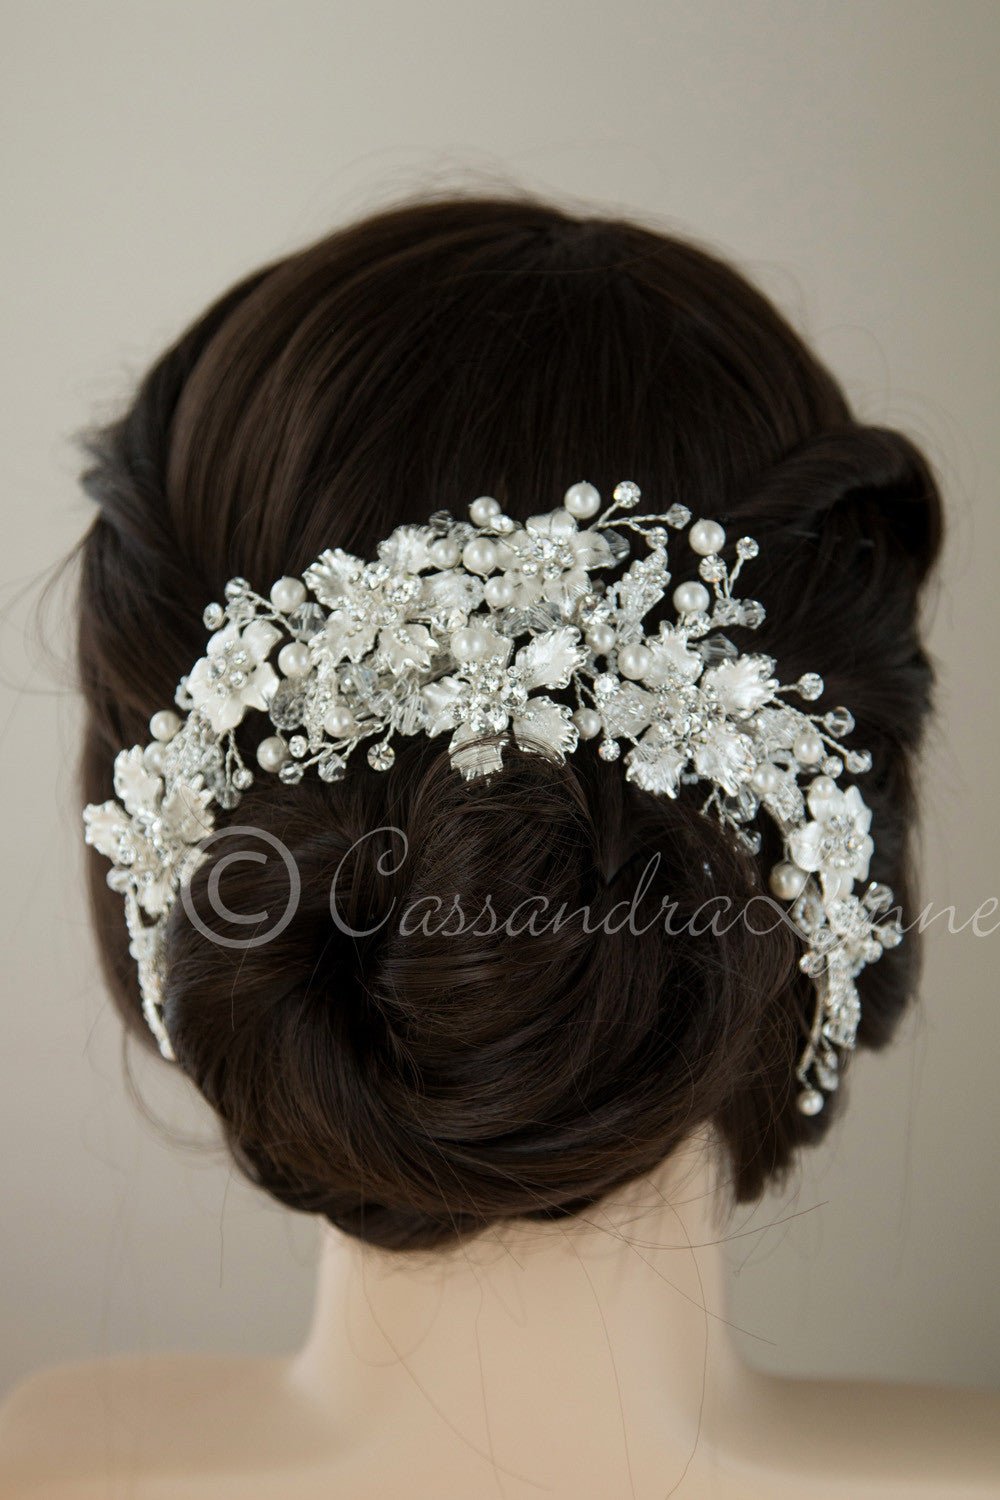 Bridal Headpiece with Frosted Flowers Pearls and Crystals - Cassandra Lynne